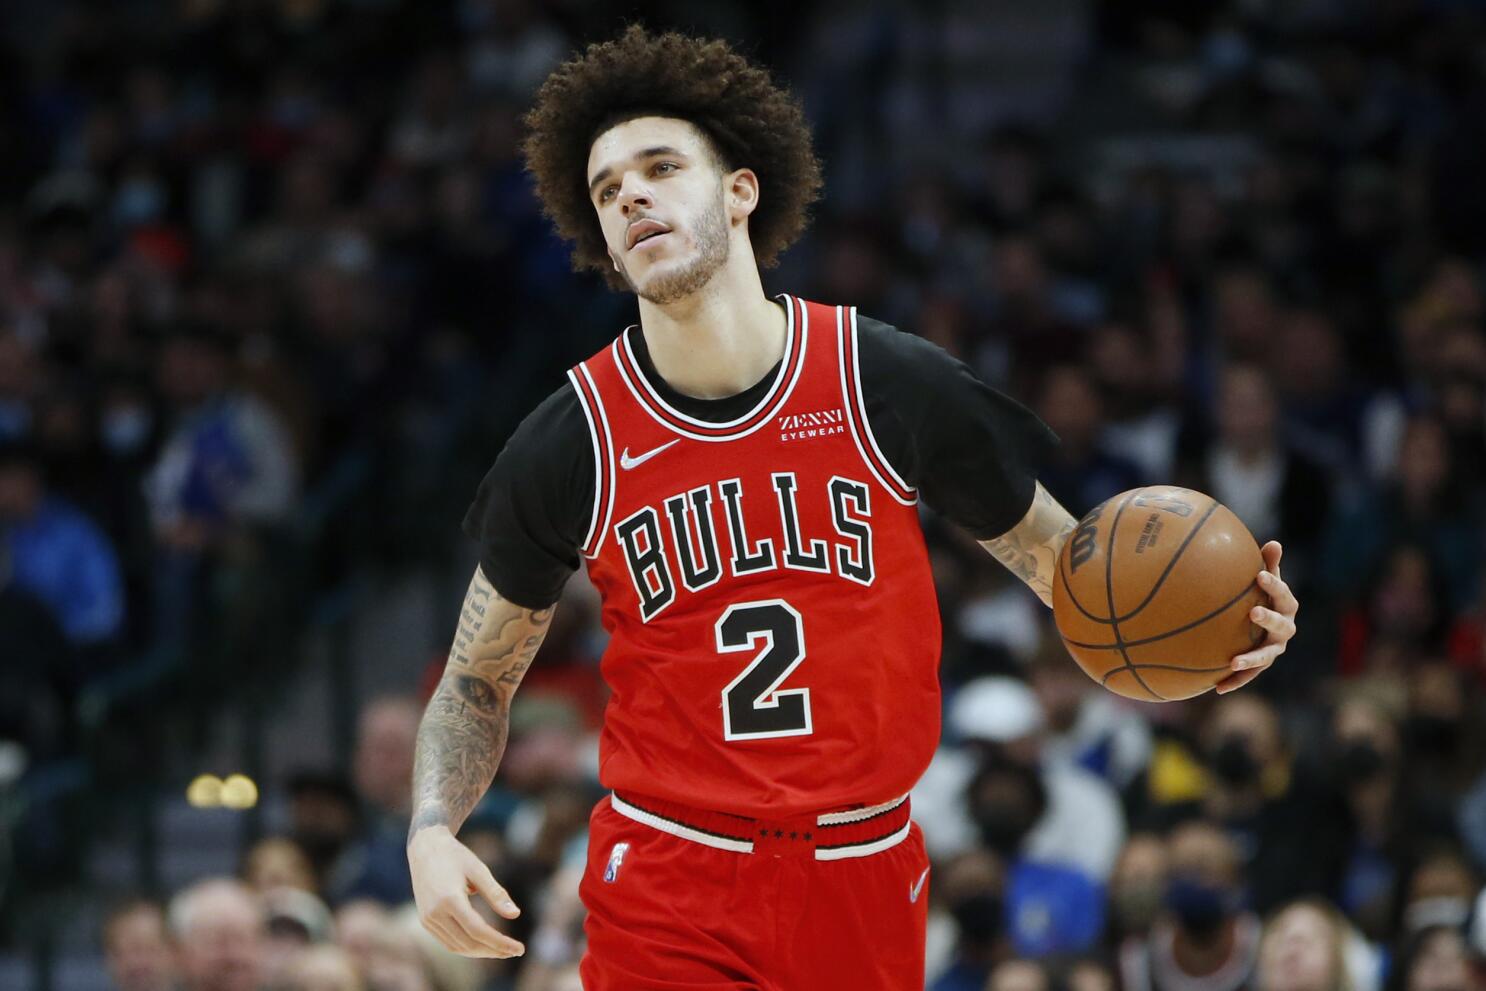 Bulls Sign Lonzo Ball to Four-Year, $85 Million Deal 